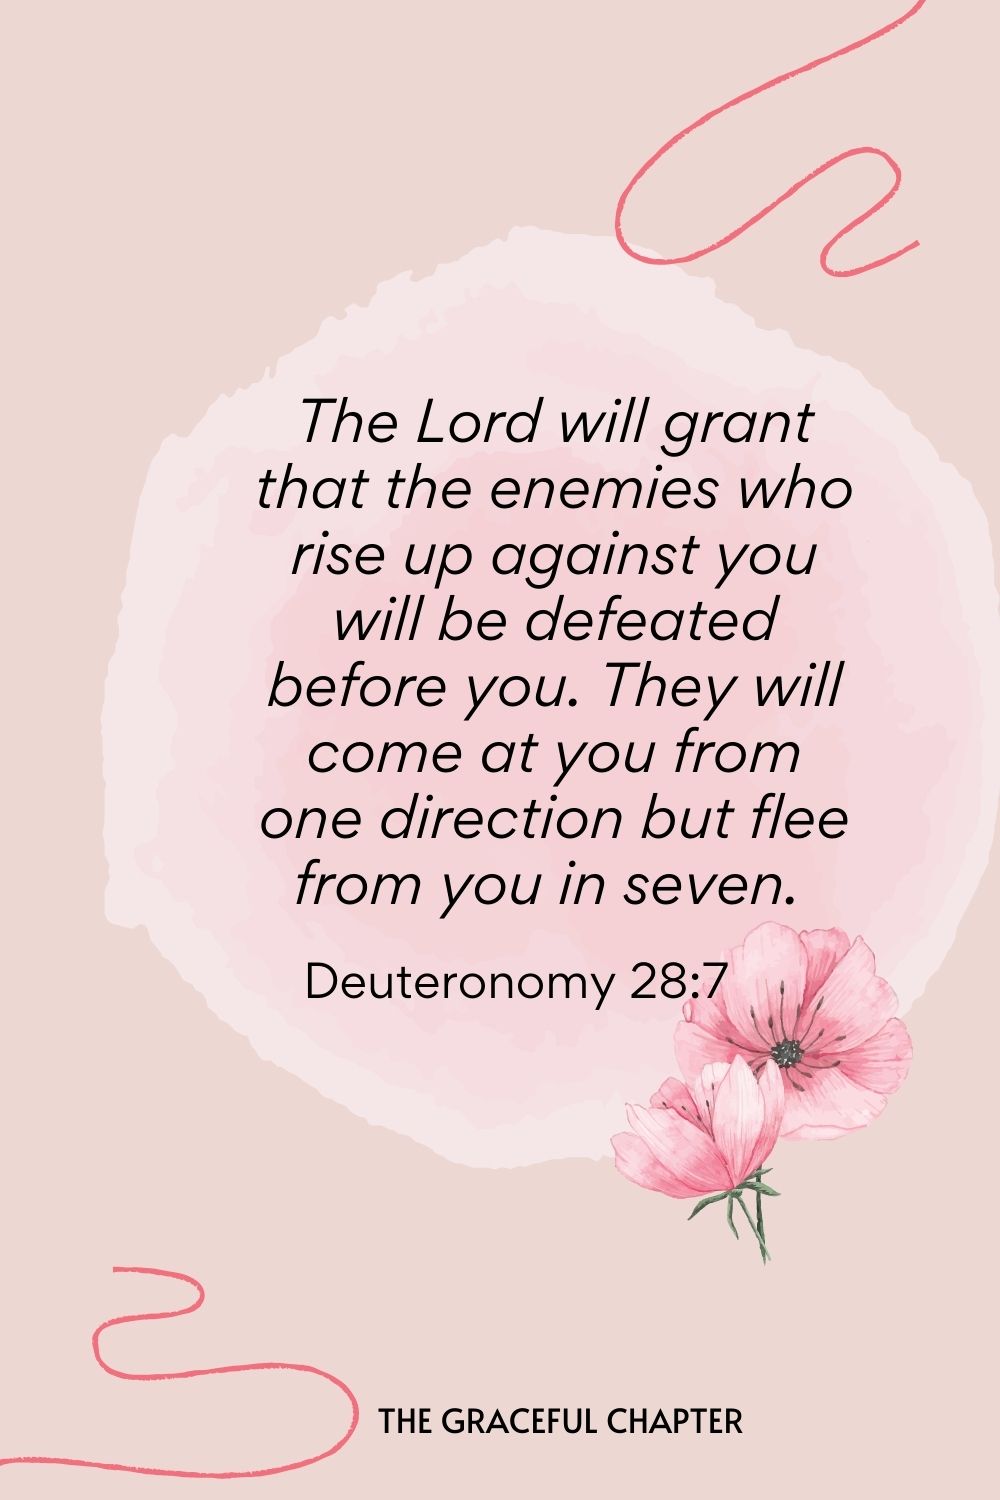 The Lord will grant that the enemies who rise up against you will be defeated before you. They will come at you from one direction but flee from you in seven.  Deuteronomy 28:7